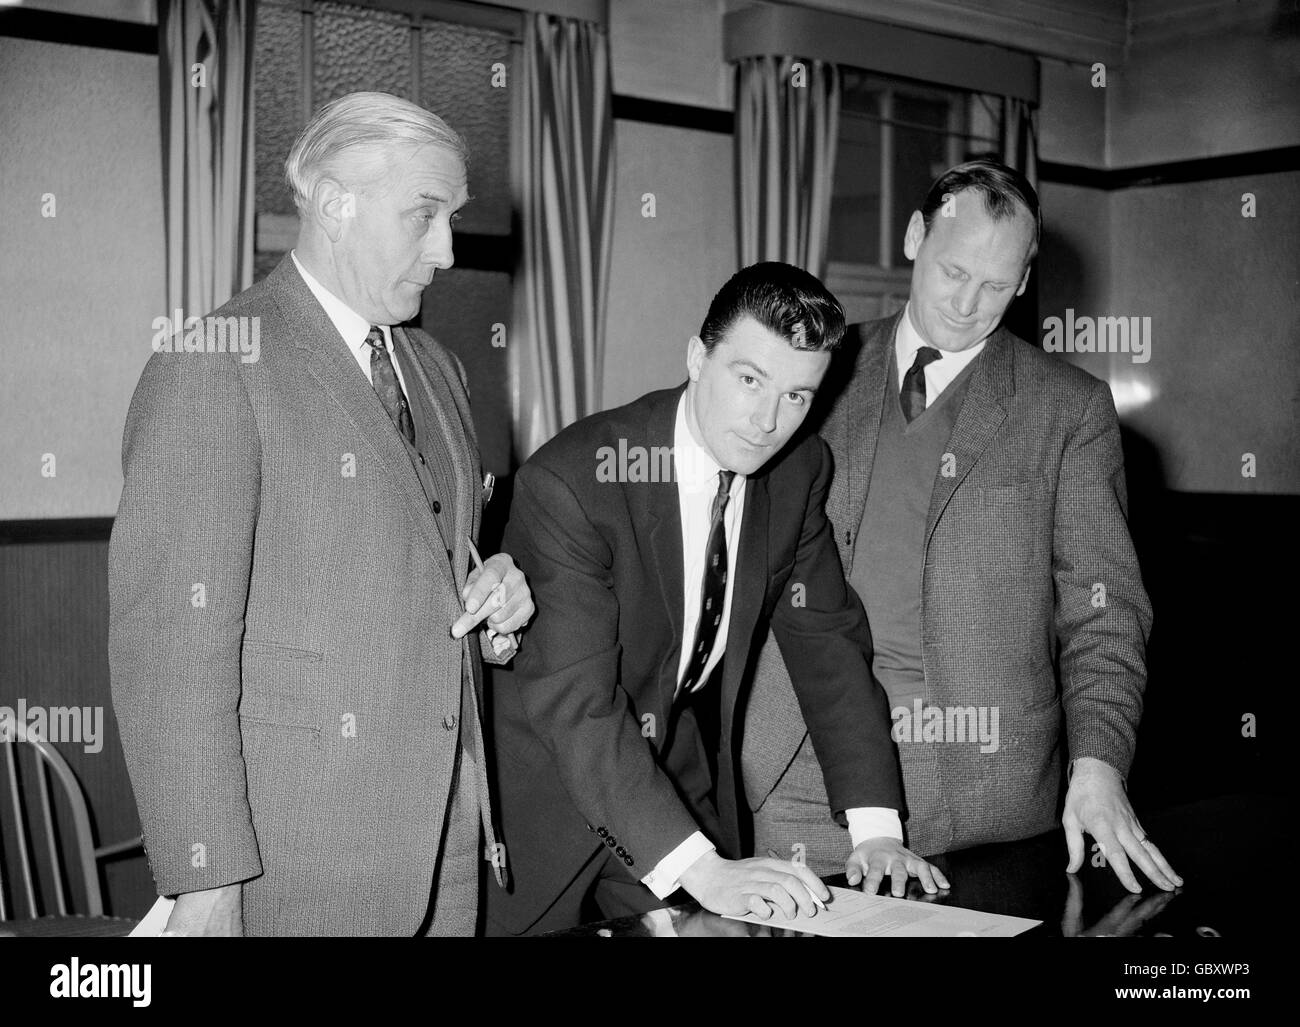 Soccer - Football League Division One - Johnny Byrne Signs For West Ham United. Johnny Byrne (c) signs for West Ham United, watched by manager Ron Greenwood (r) and Crystal Palace manager Arthur Rowe (l) Stock Photo